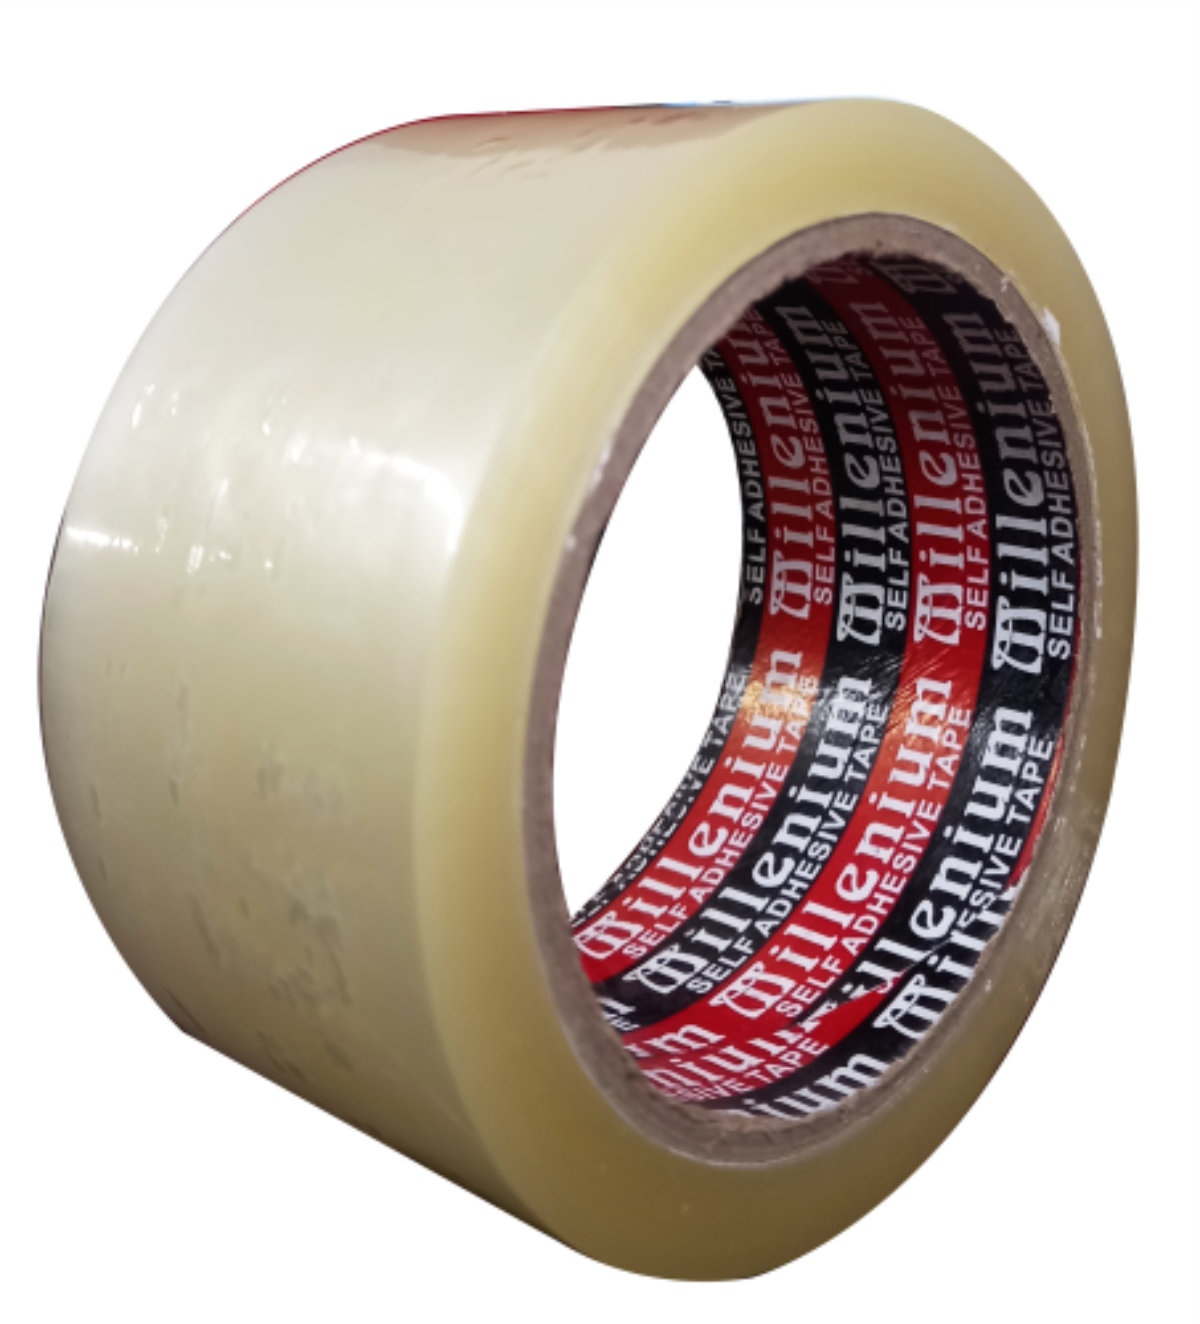 Get Latest Price of Transparent Self Adhesive Tapes - millenium Packaging